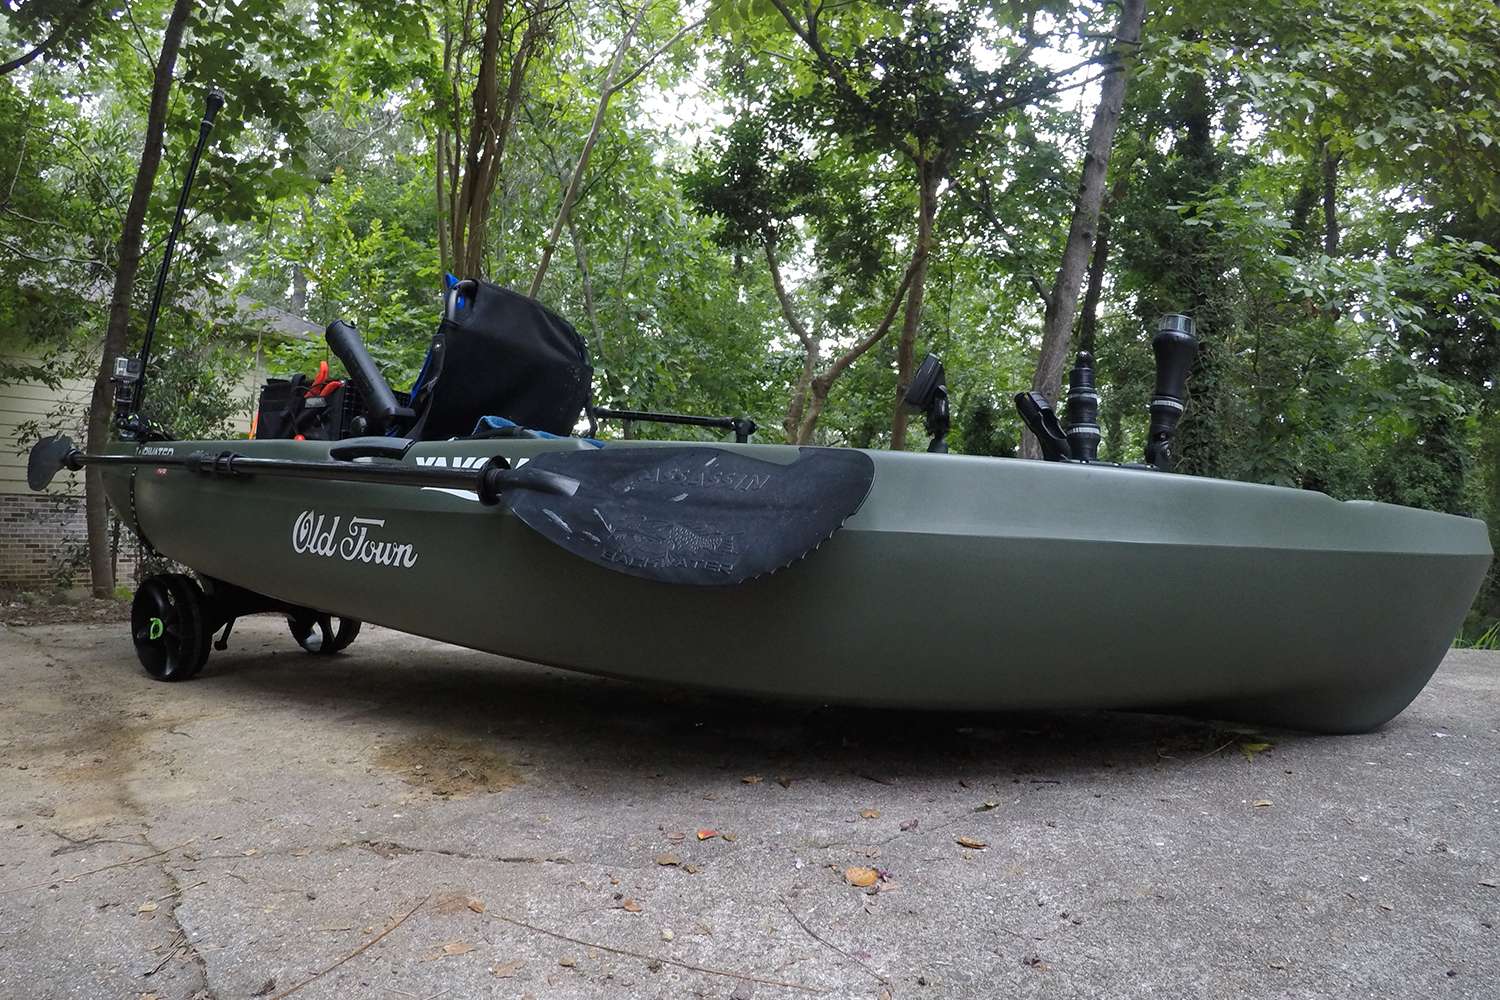 The Old Town Topwater 106 is a compact, yet very effective fishing machine that's easy to load, drive and store. Plus it looks great in the process. The YakGear add-ons make it a pure fish-catching machine. 